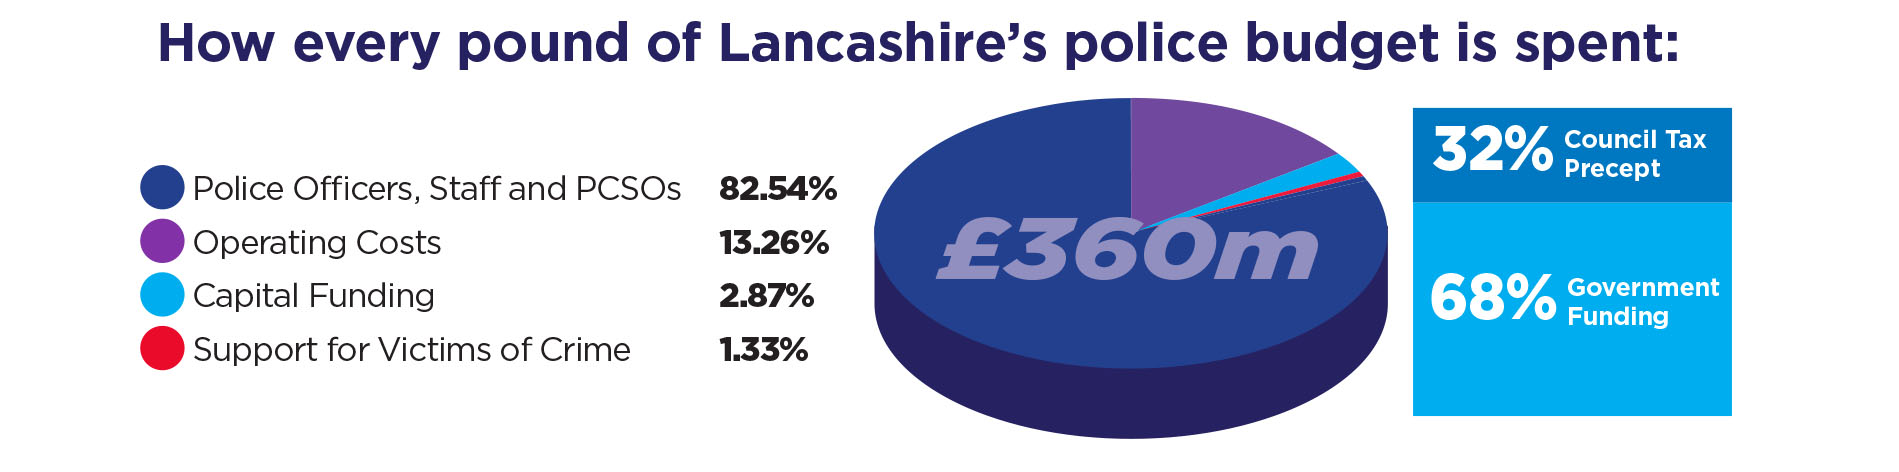 How every pound of Lancashire’s police budget is spent: Total budget £360m - Police Officers, Staff and PCSOs - 82.54% - Operating Costs 13.26% - Capital Funding 2.87% - Support for Victims of Crime 1.33% 32% of the total budget comes from the council tax precept 68% of the total budget comes from Government funding